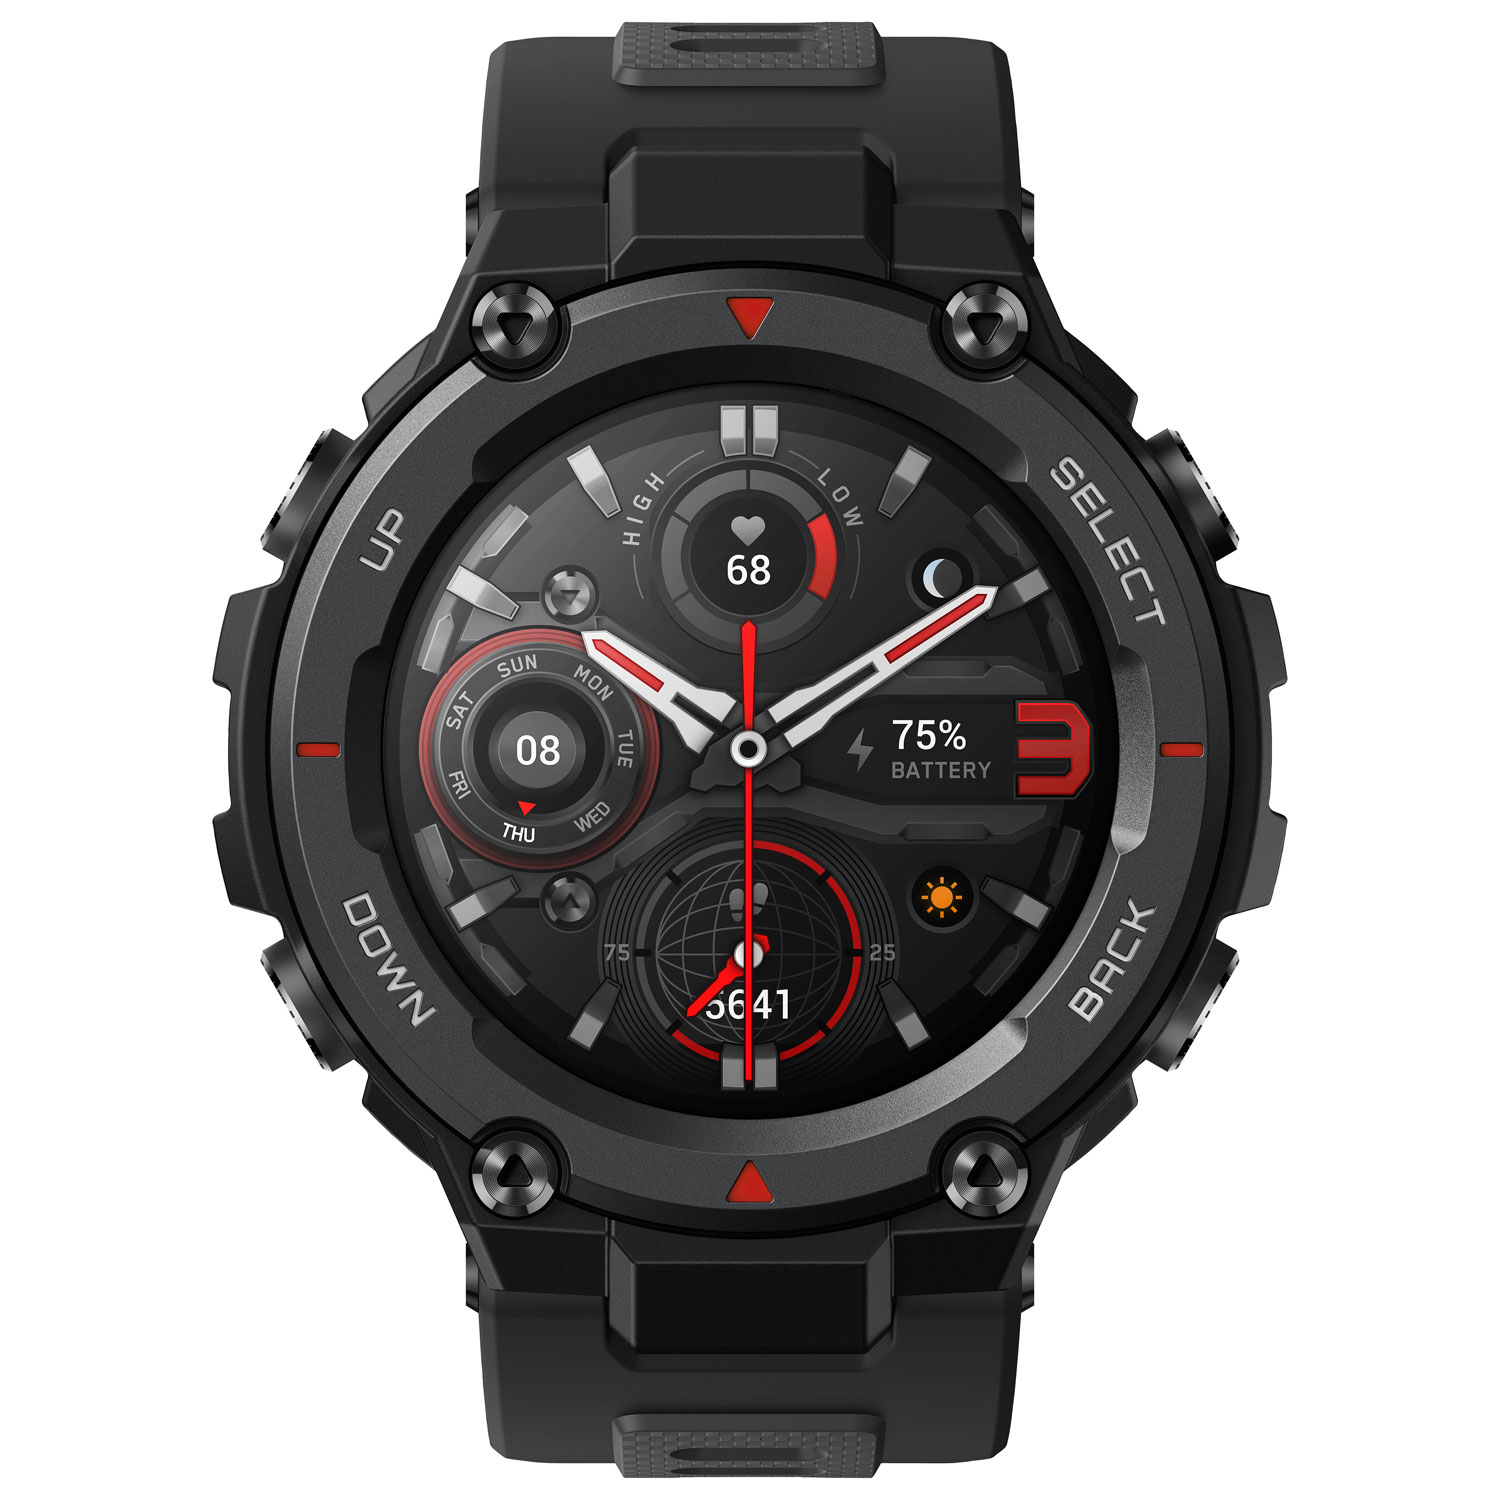 Amazfit T-Rex Pro Smartwatch with Heart Rate Monitor - Black